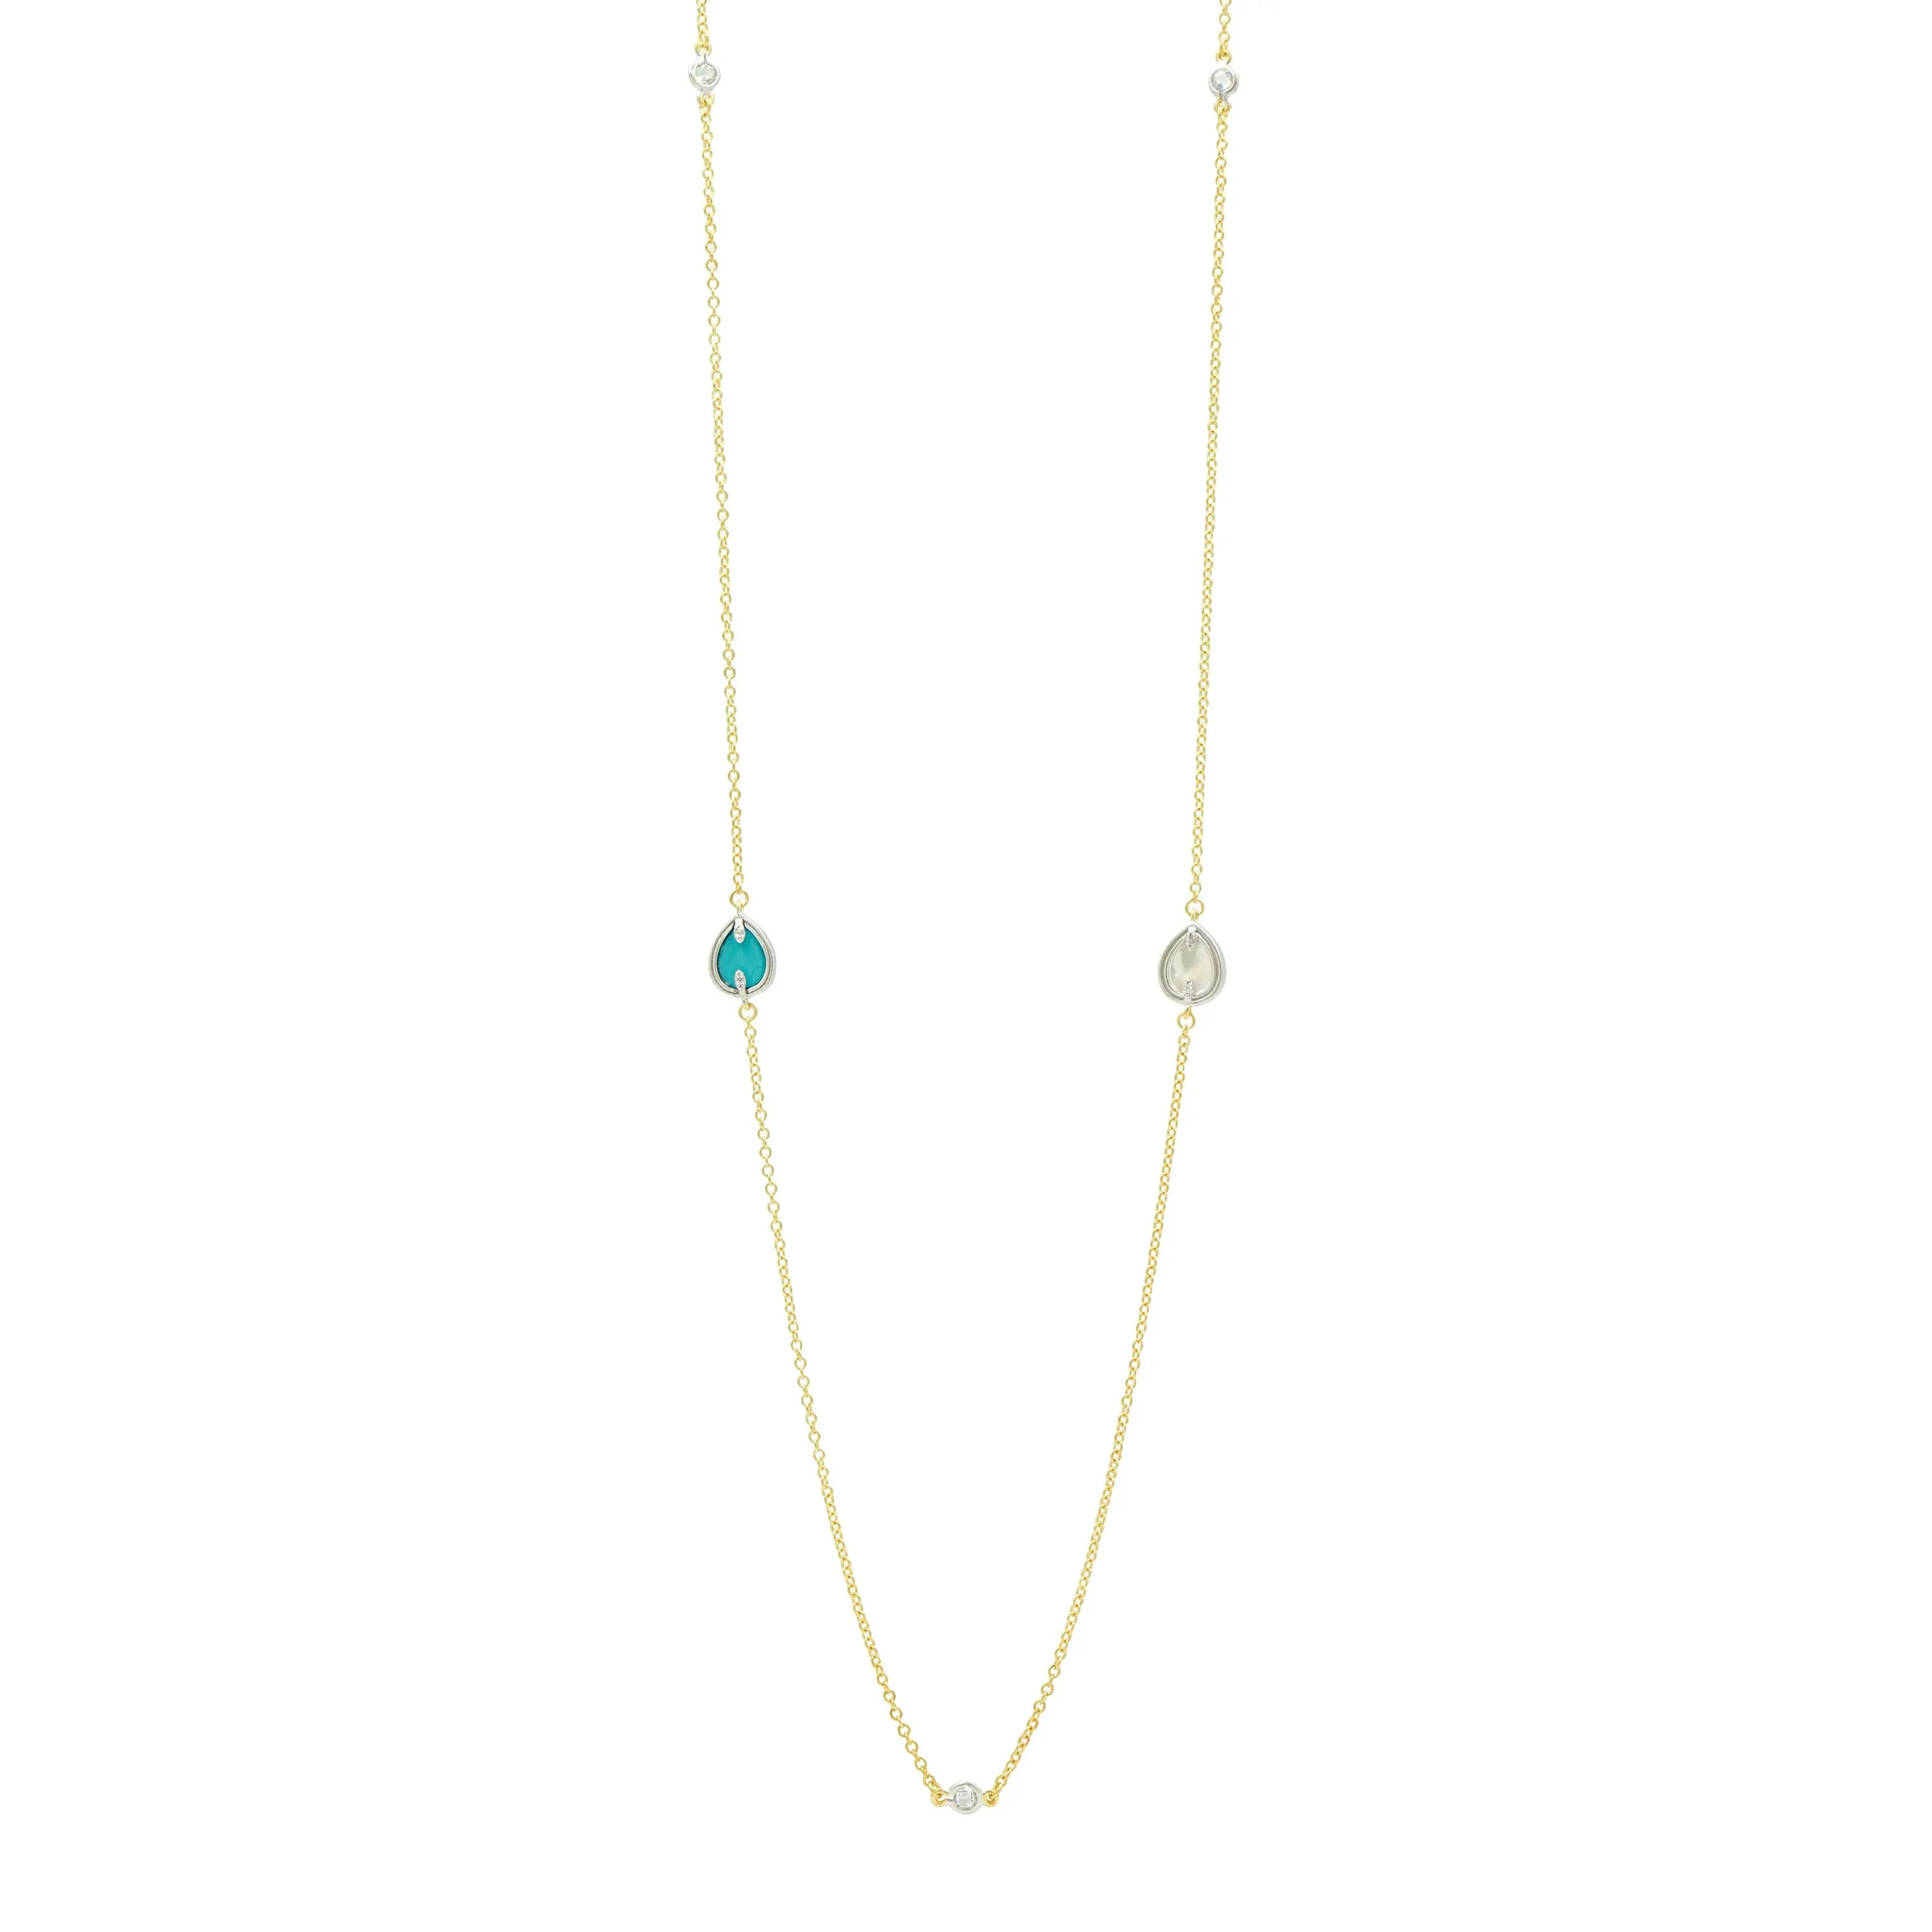 David Yurman Turquoise 3 Station Necklace - Couture USA